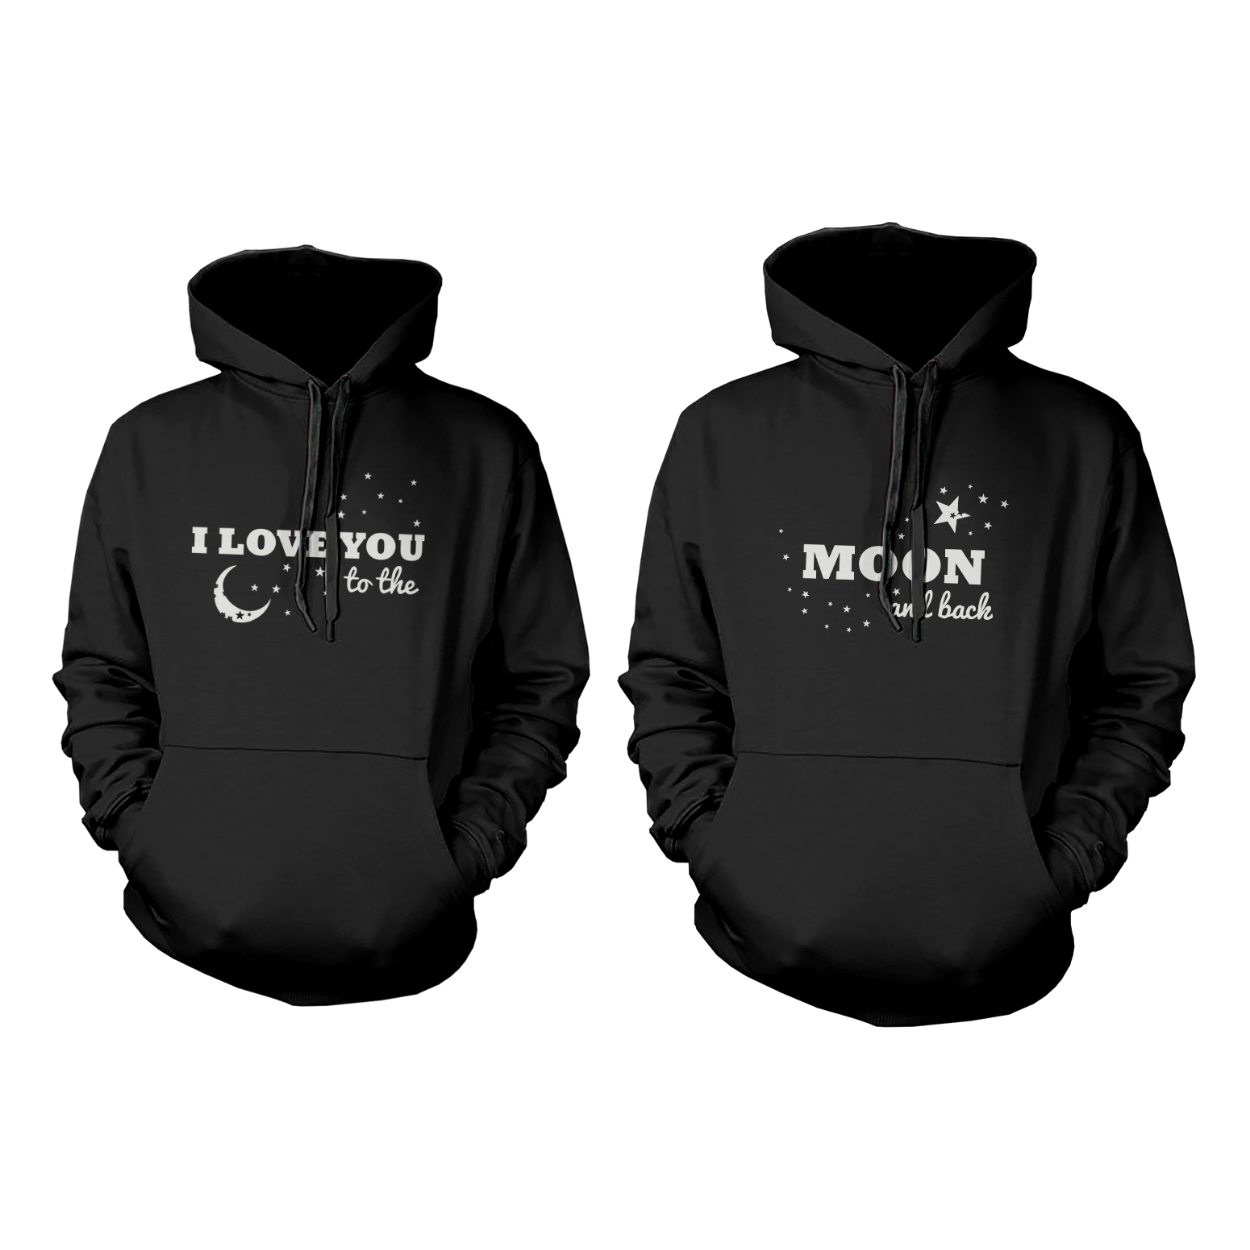 I Love You to the Moon and Back Matching Couple Hoodies